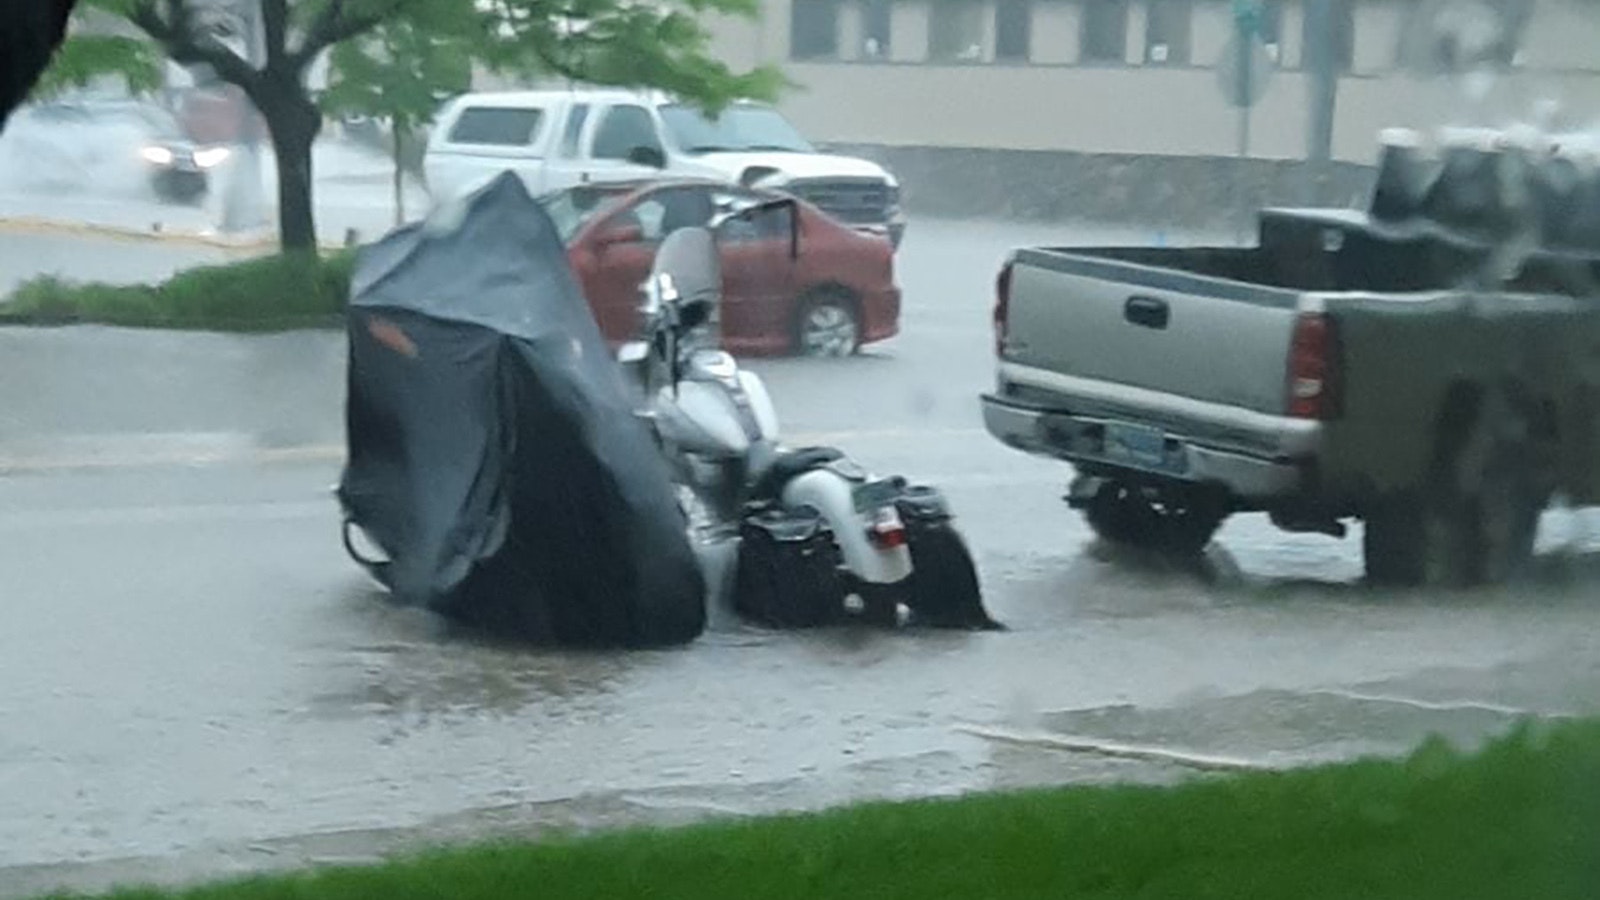 Flash flooding in Casper on Thursday at Ash and B streets.